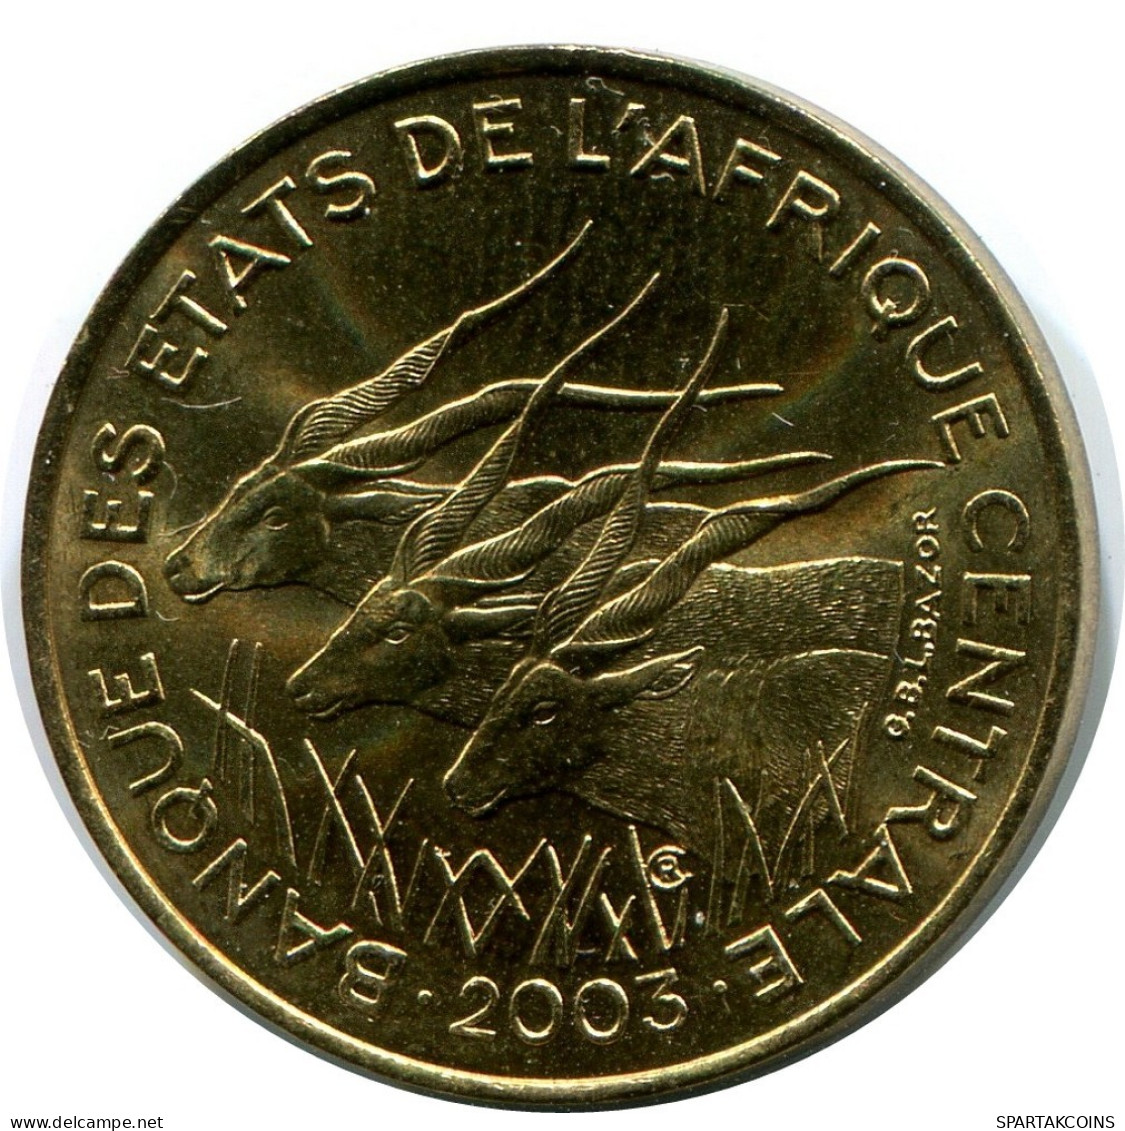 5 FRANCS CFA 2003 CENTRAL AFRICAN STATES (BEAC) Pièce #AP859.F.A - Central African Republic